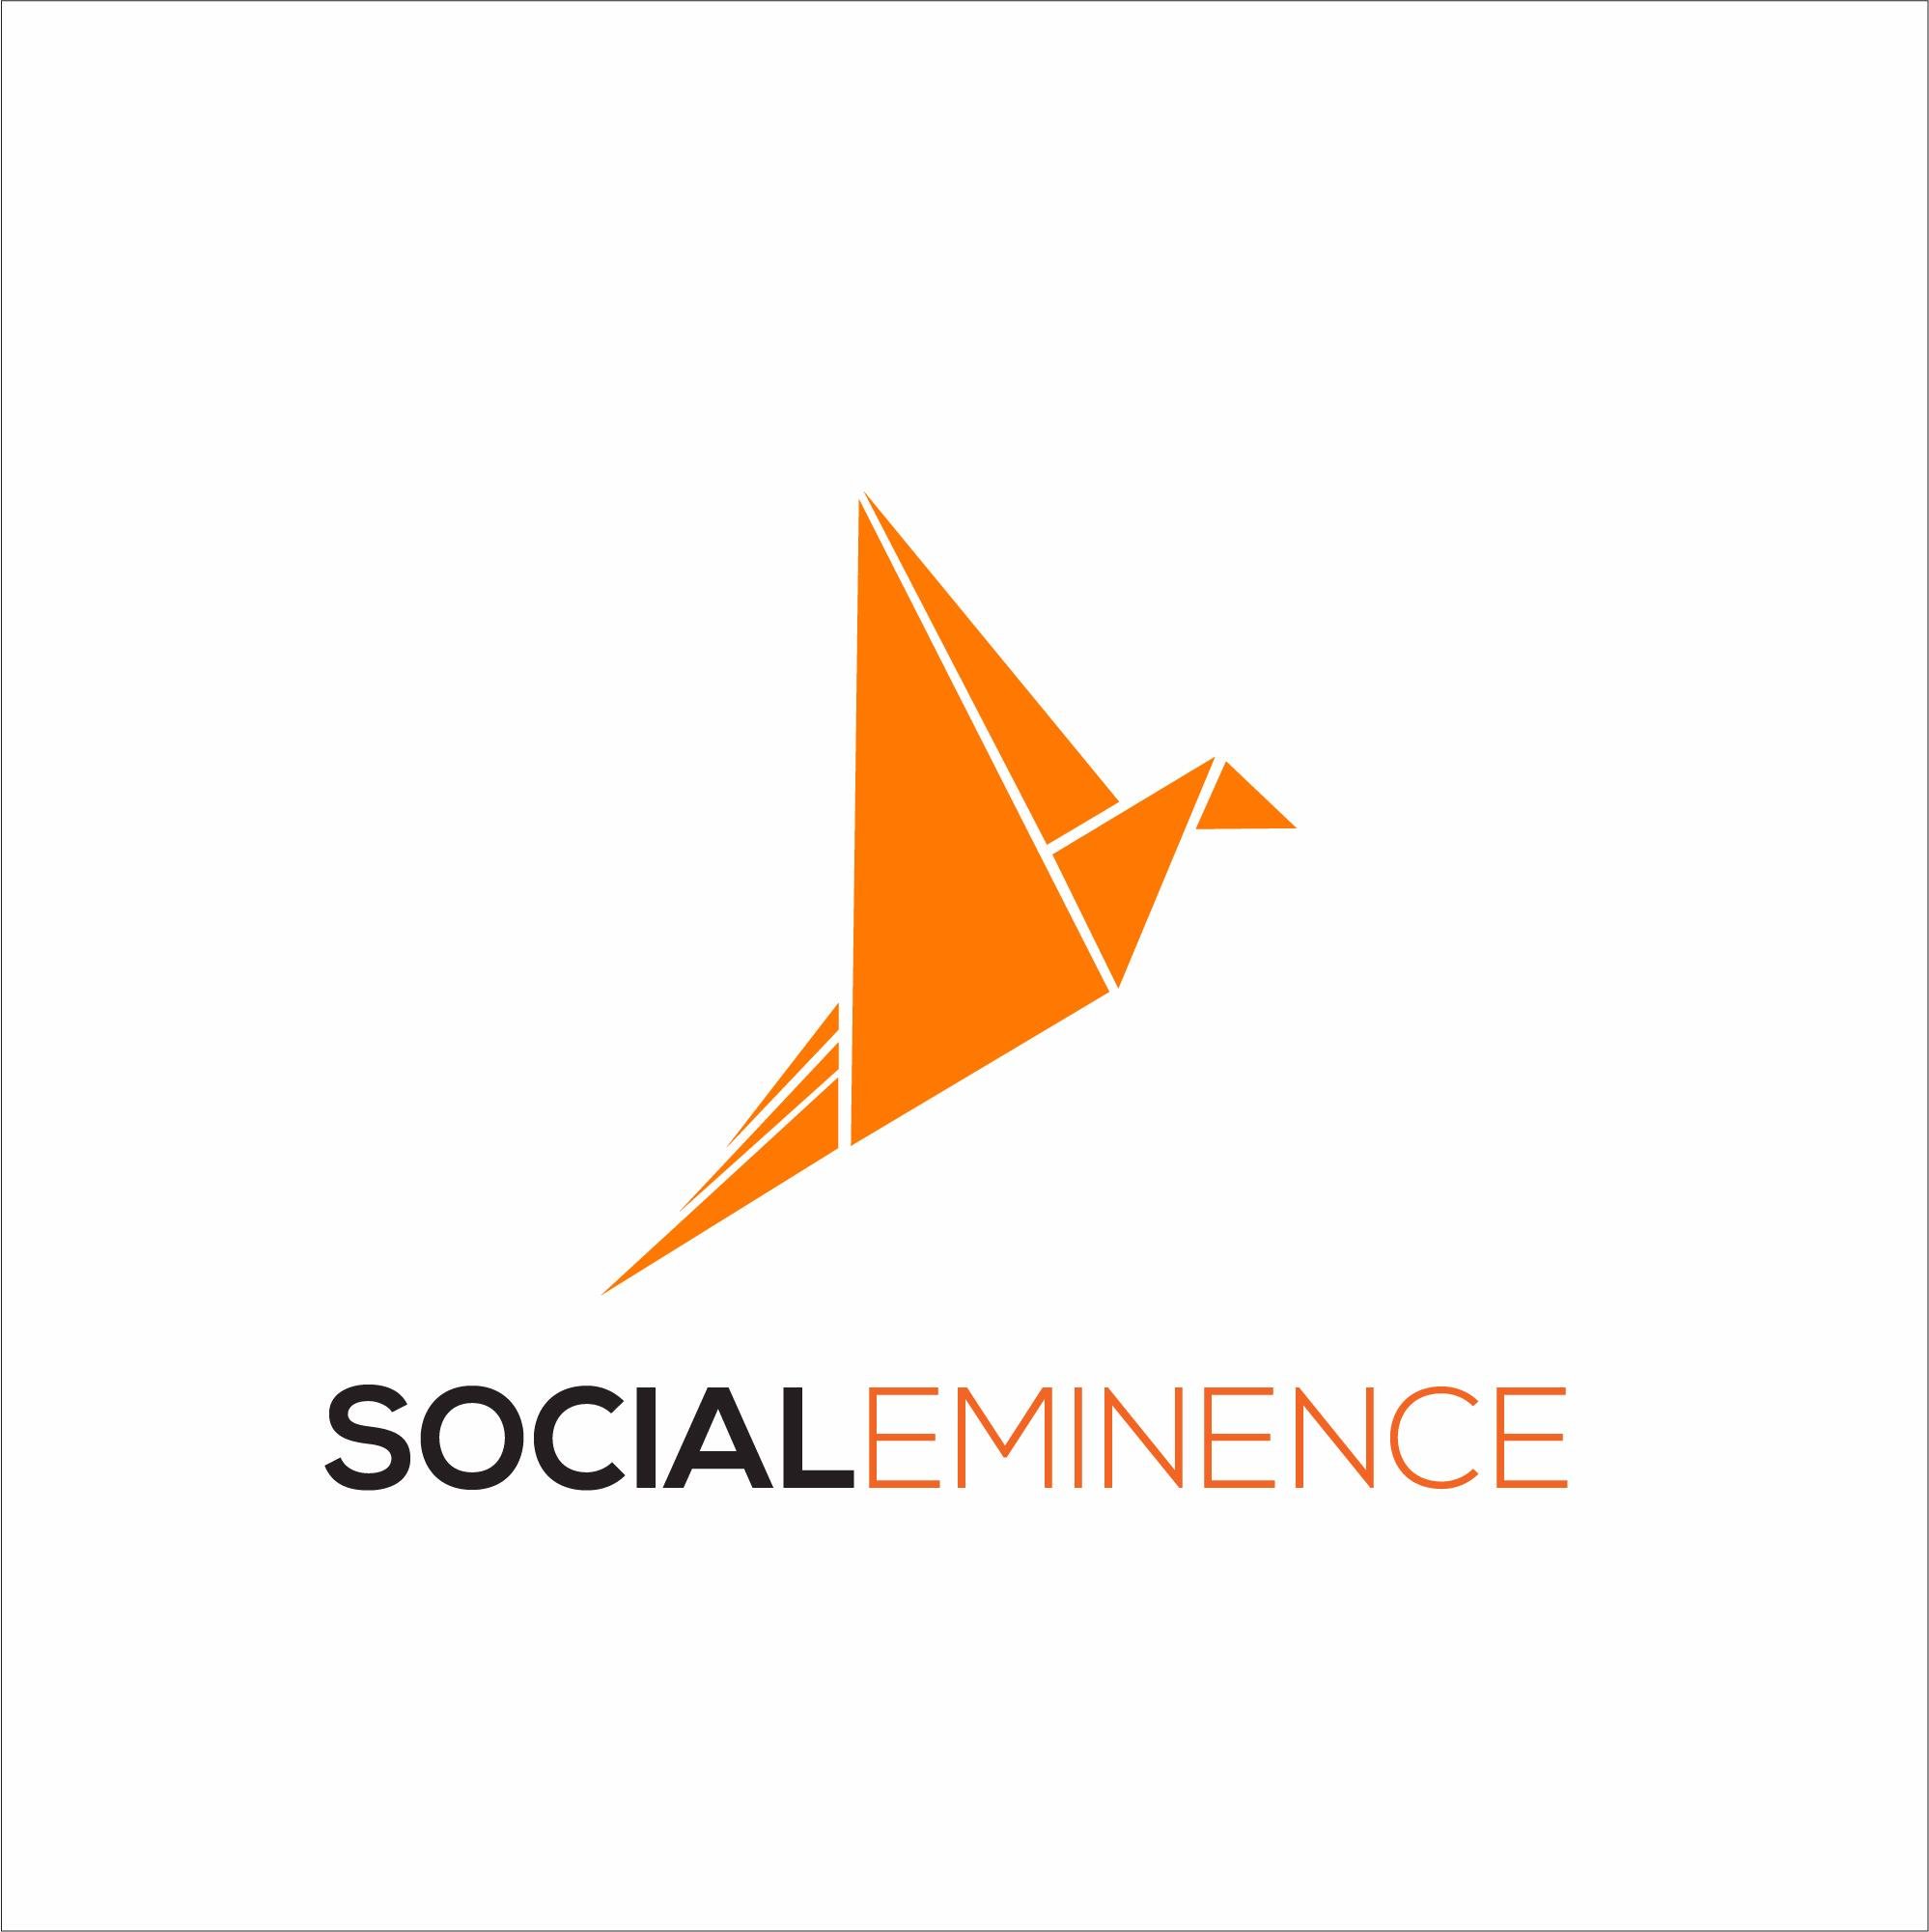 Social Eminence is a brand management and social productivity platform for individuals and institutions.